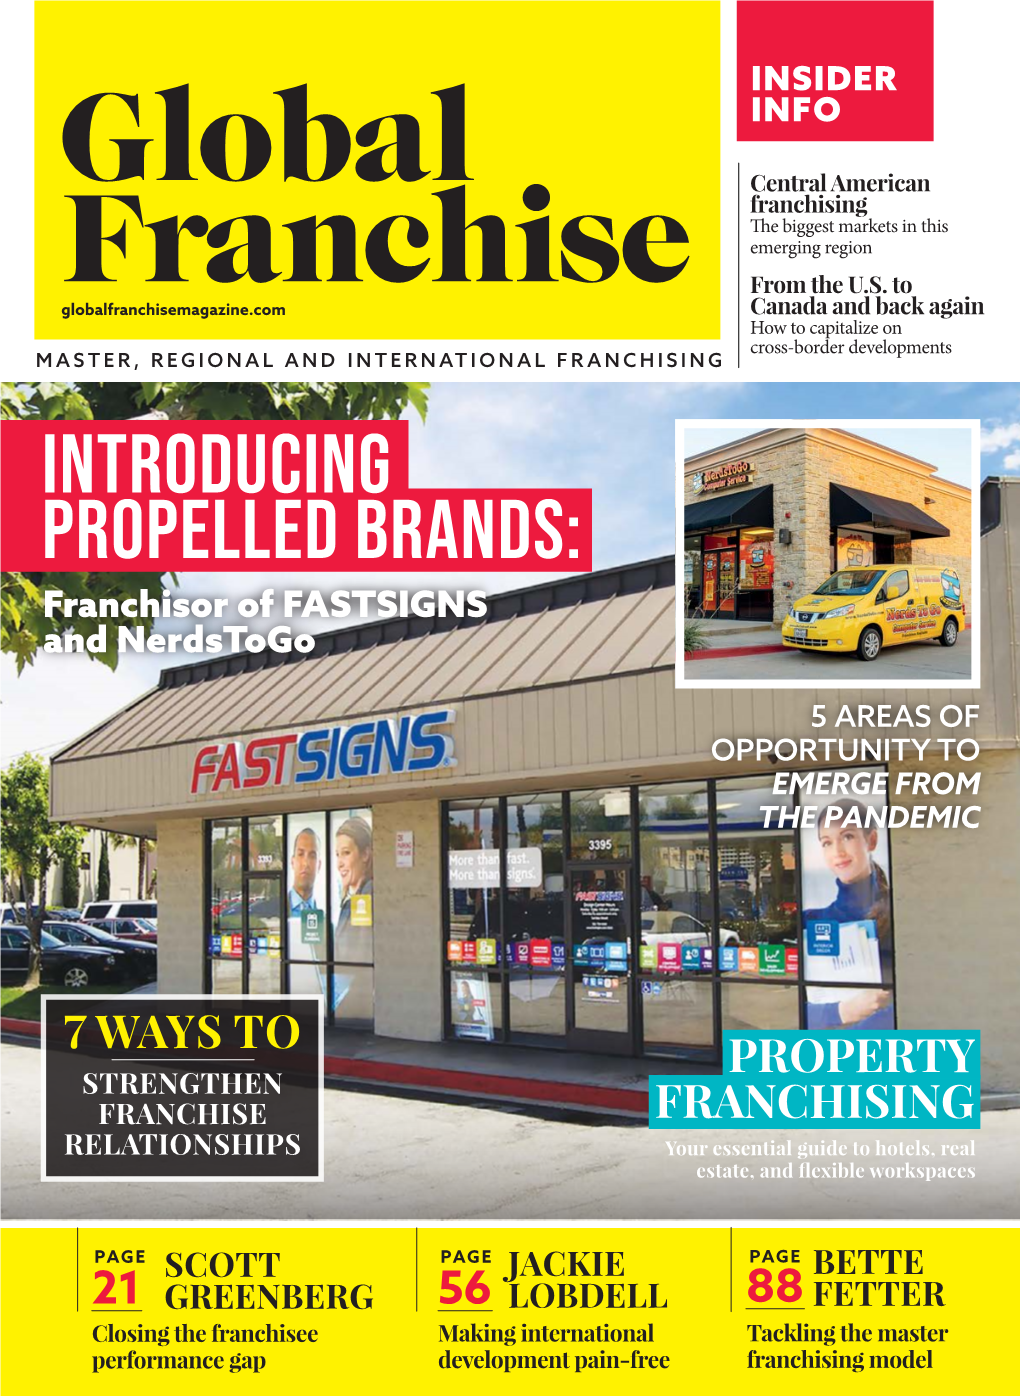 INTRODUCING PROPELLED BRANDS: Franchisor of FASTSIGNS and Nerdstogo